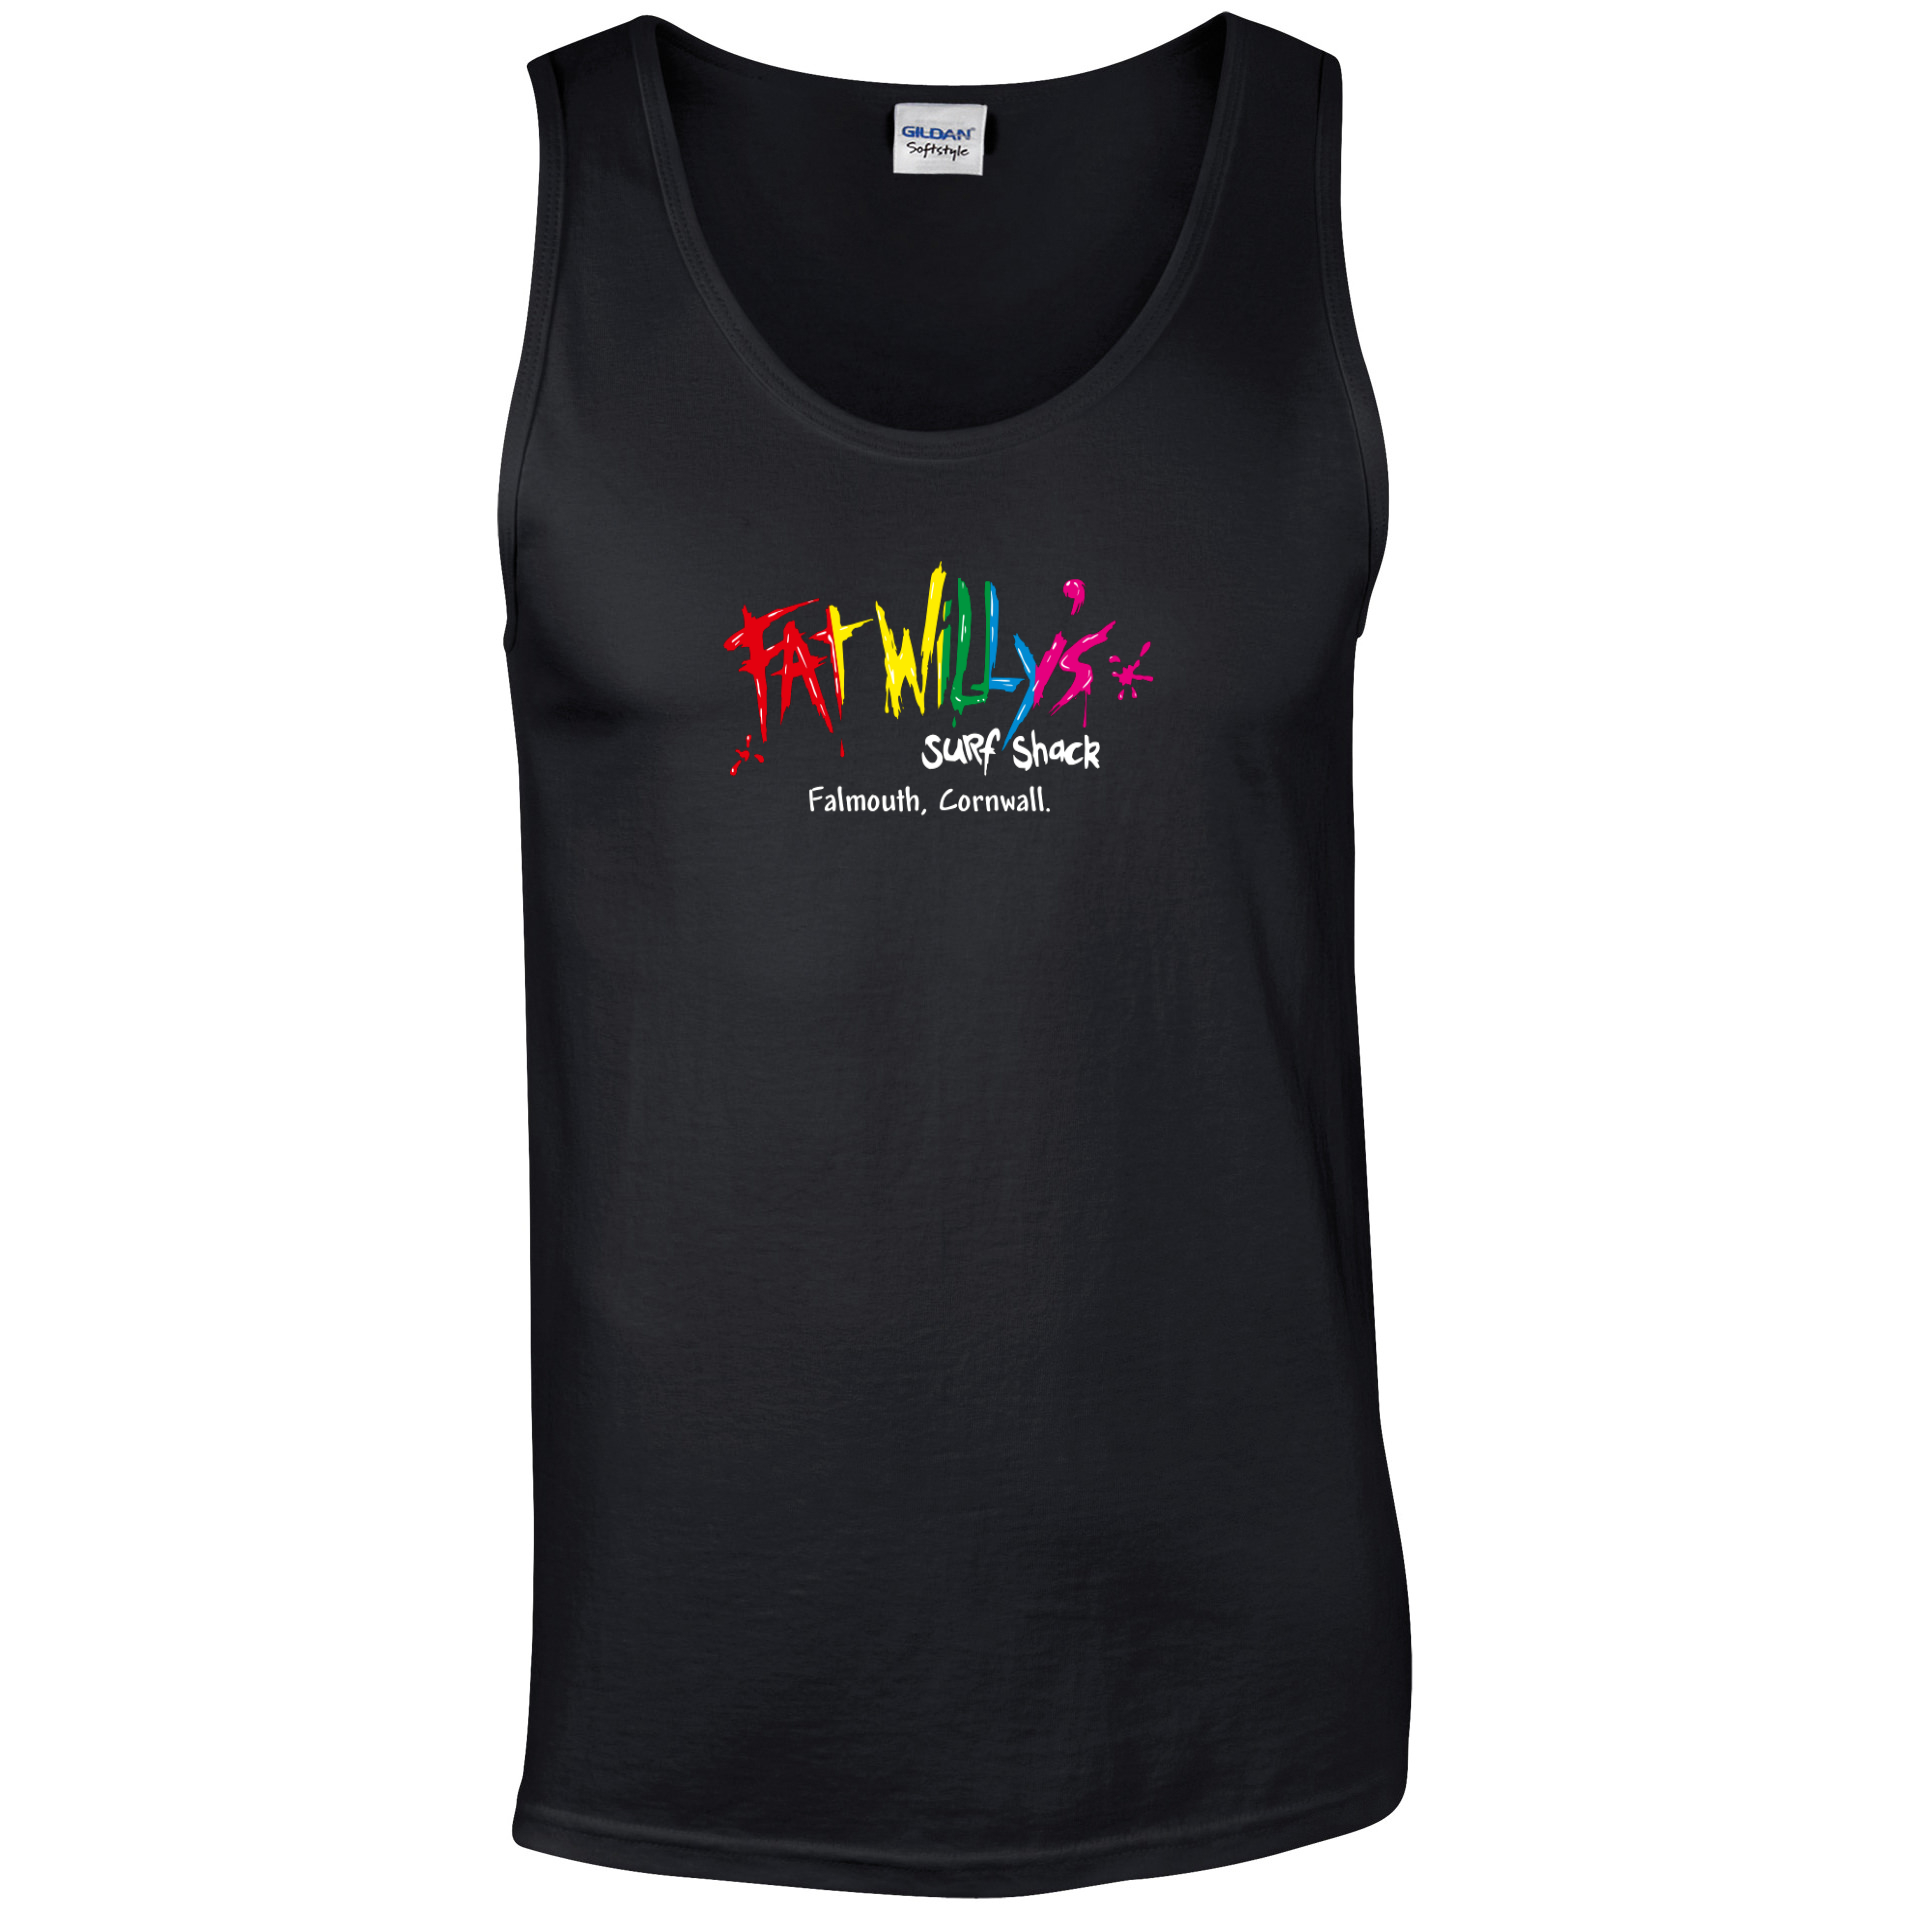 Adult Mens Black Vest - Fat Willy's - : Cornish surf-style personiﬁed